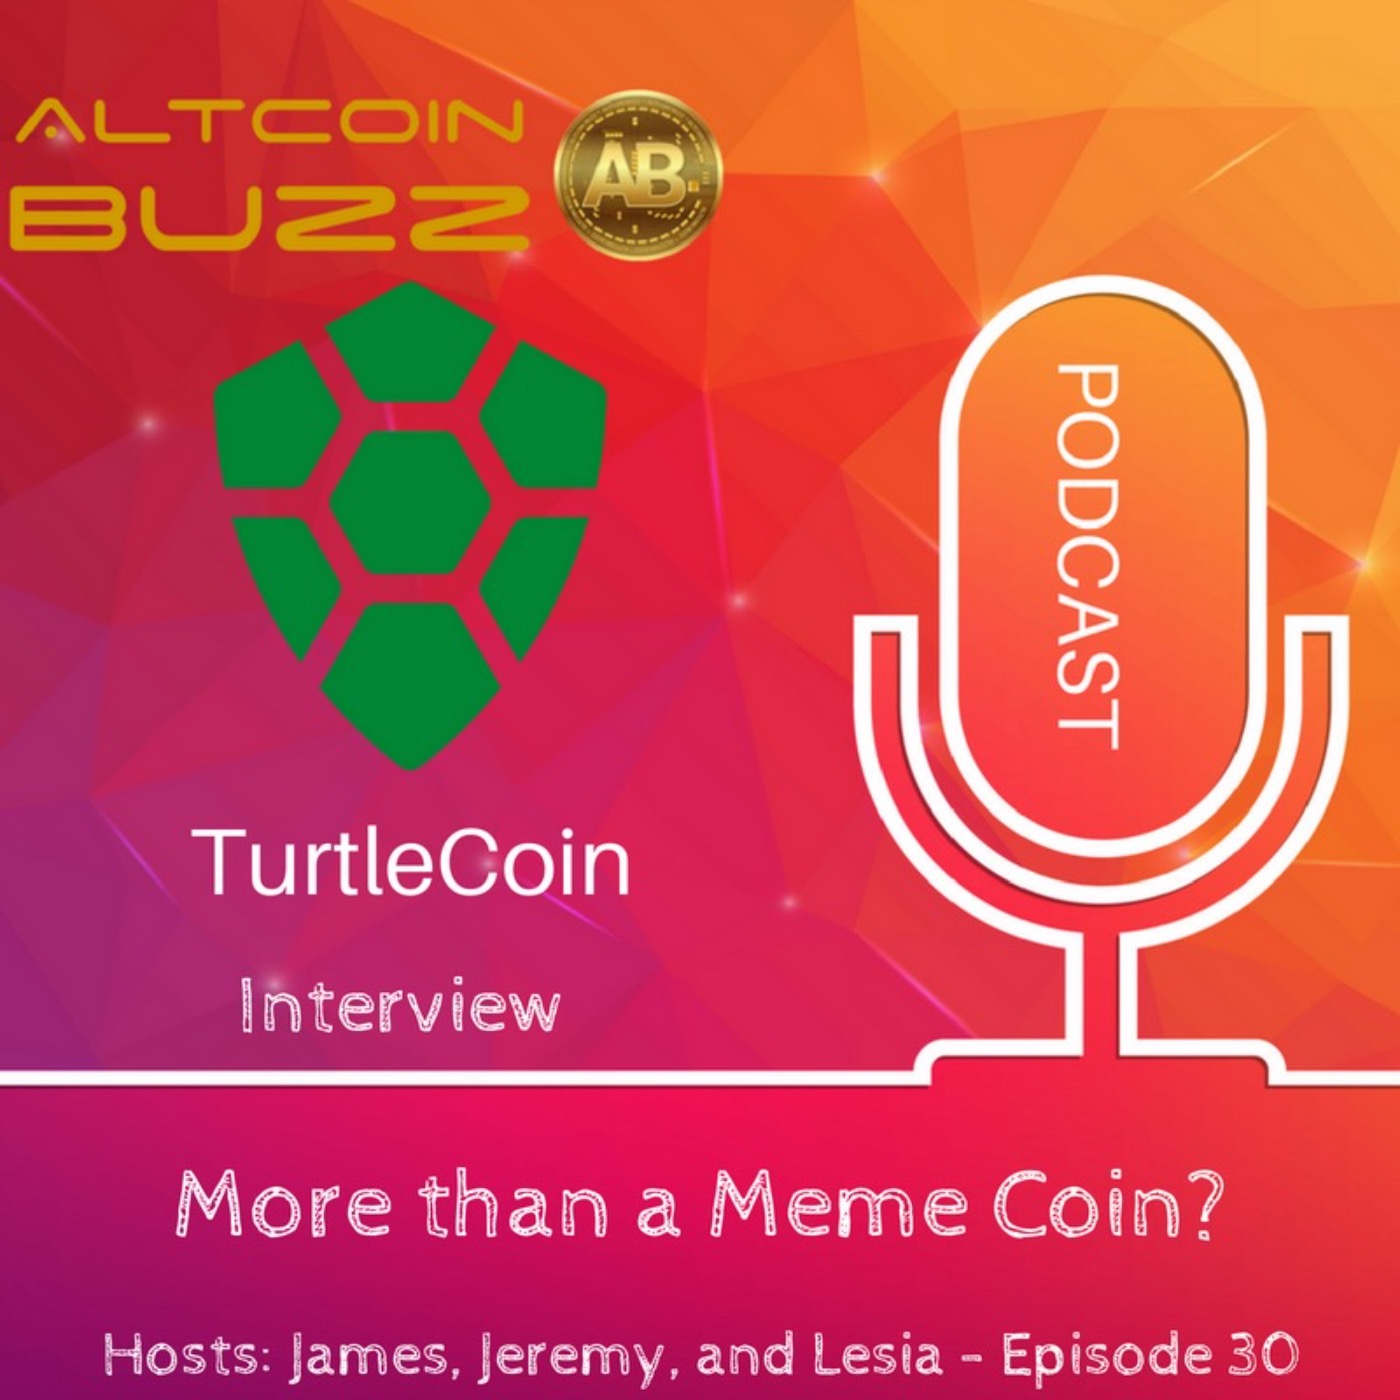 More than a Meme Coin? Interview with TurtleCoin - EP. 30